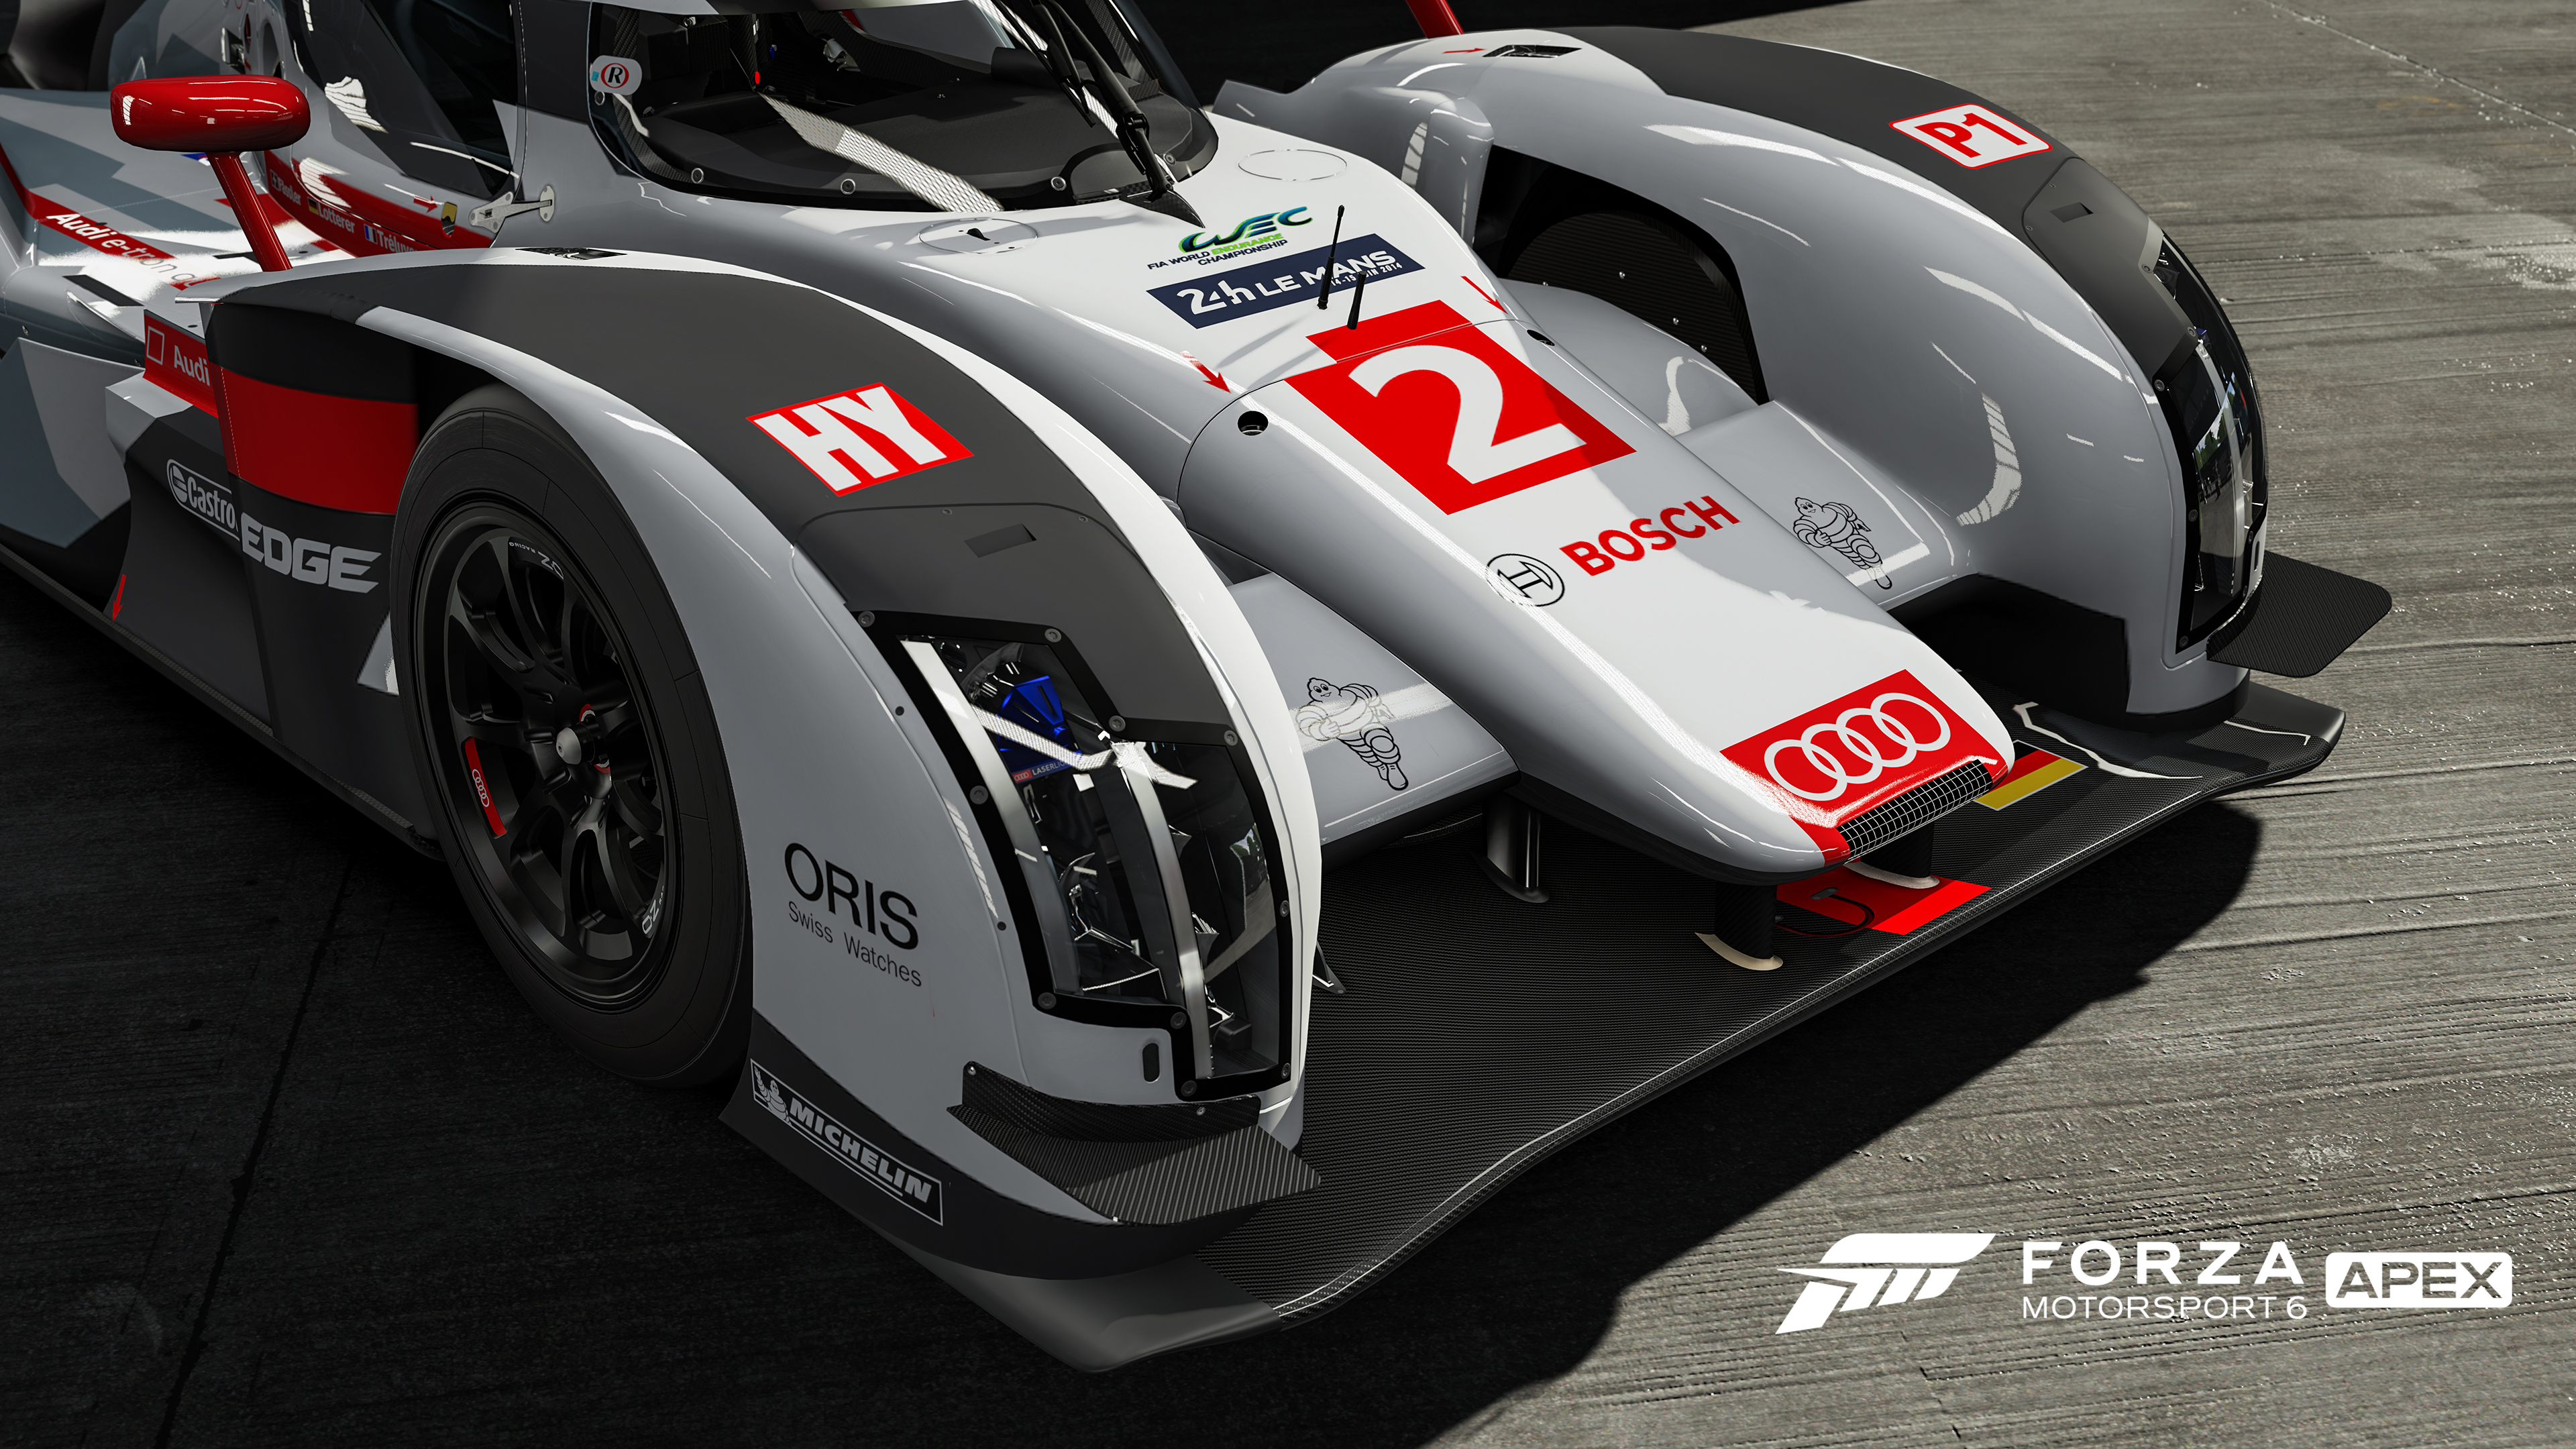 Forza Motorsport 6: Apex coming to PC for free this Spring - The Koalition